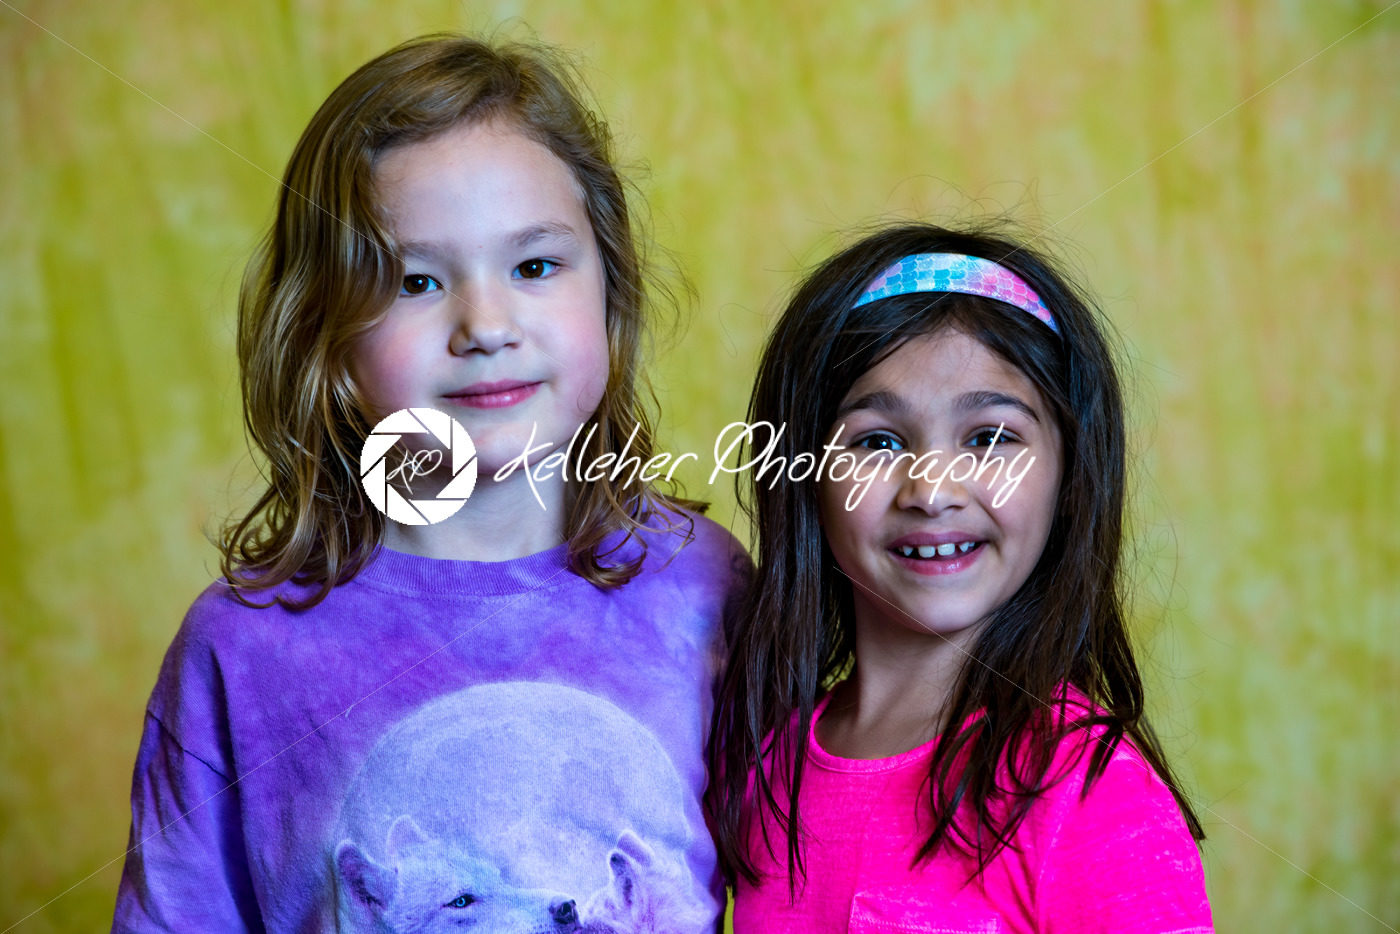 Rosemont, PA – May 18, 2018: AIS Mayfair Photo Booth - Kelleher Photography Store